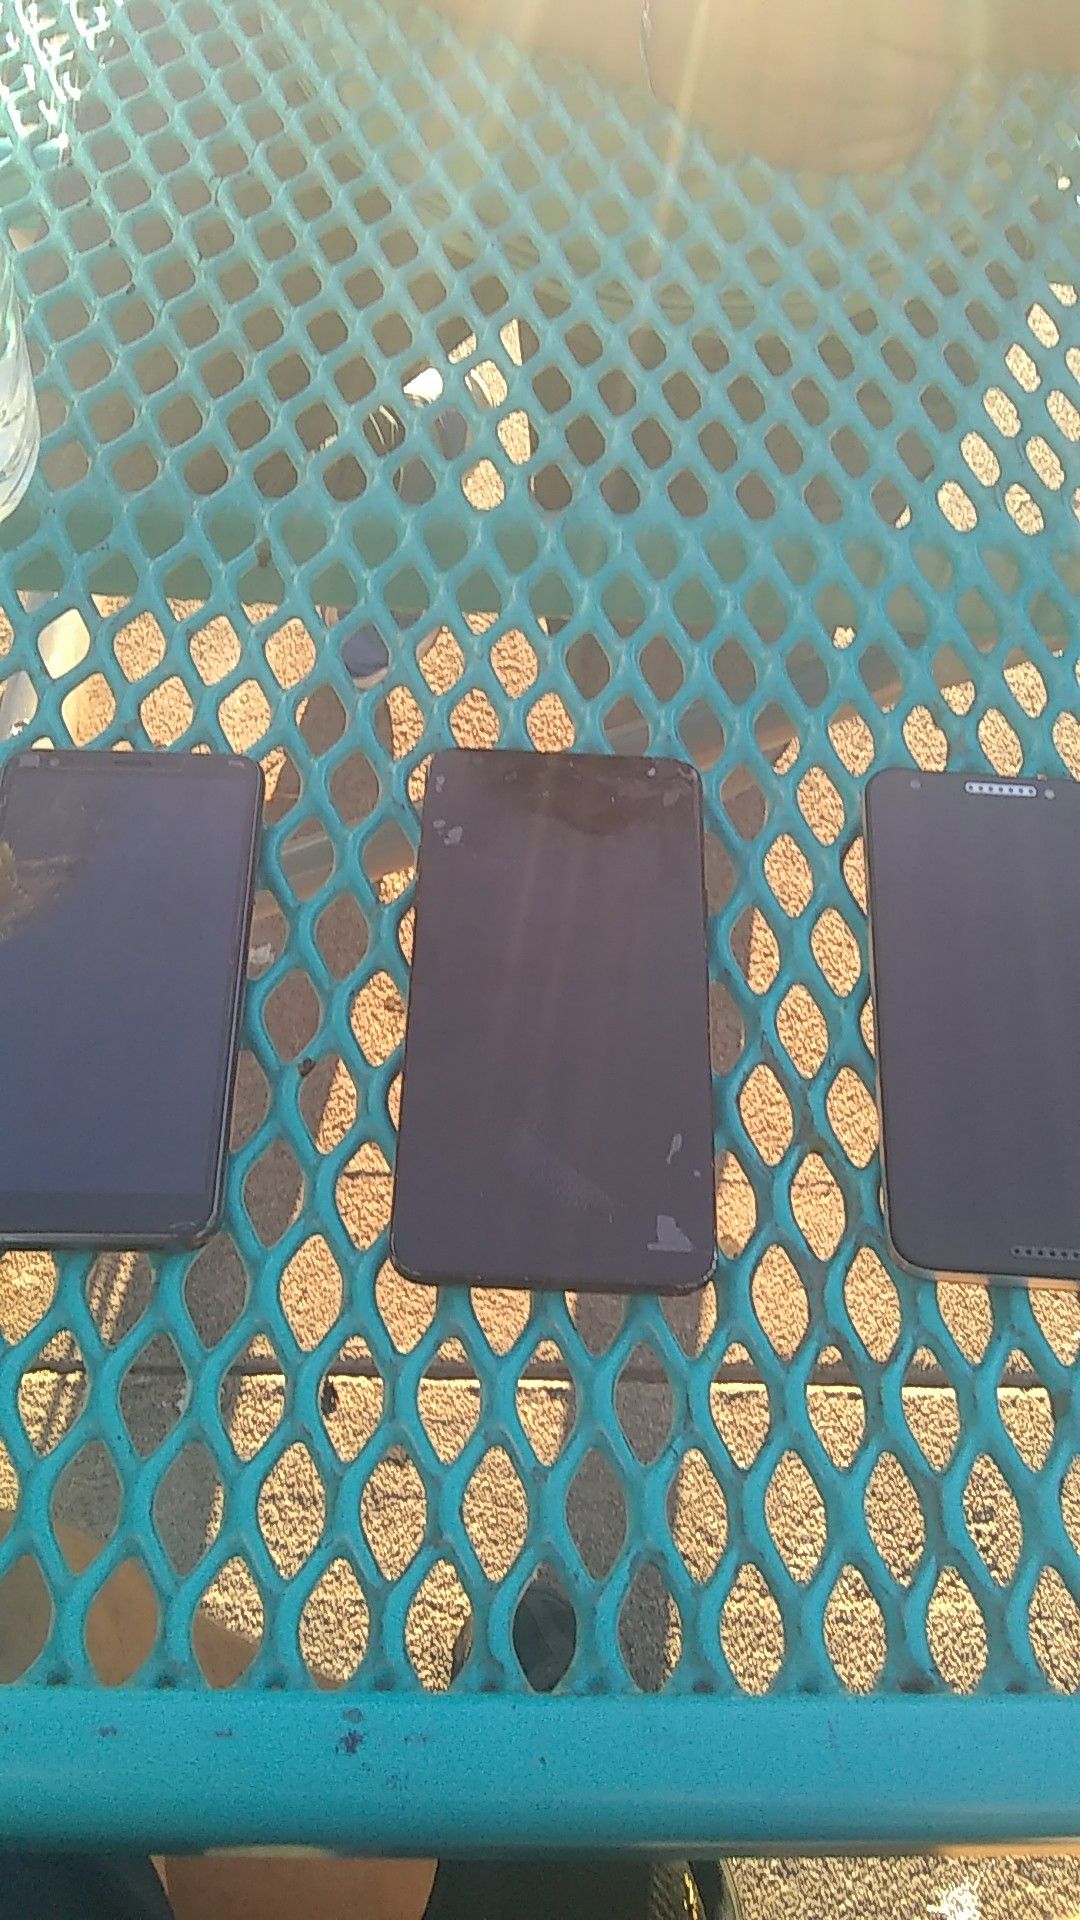 3 phone's for sale